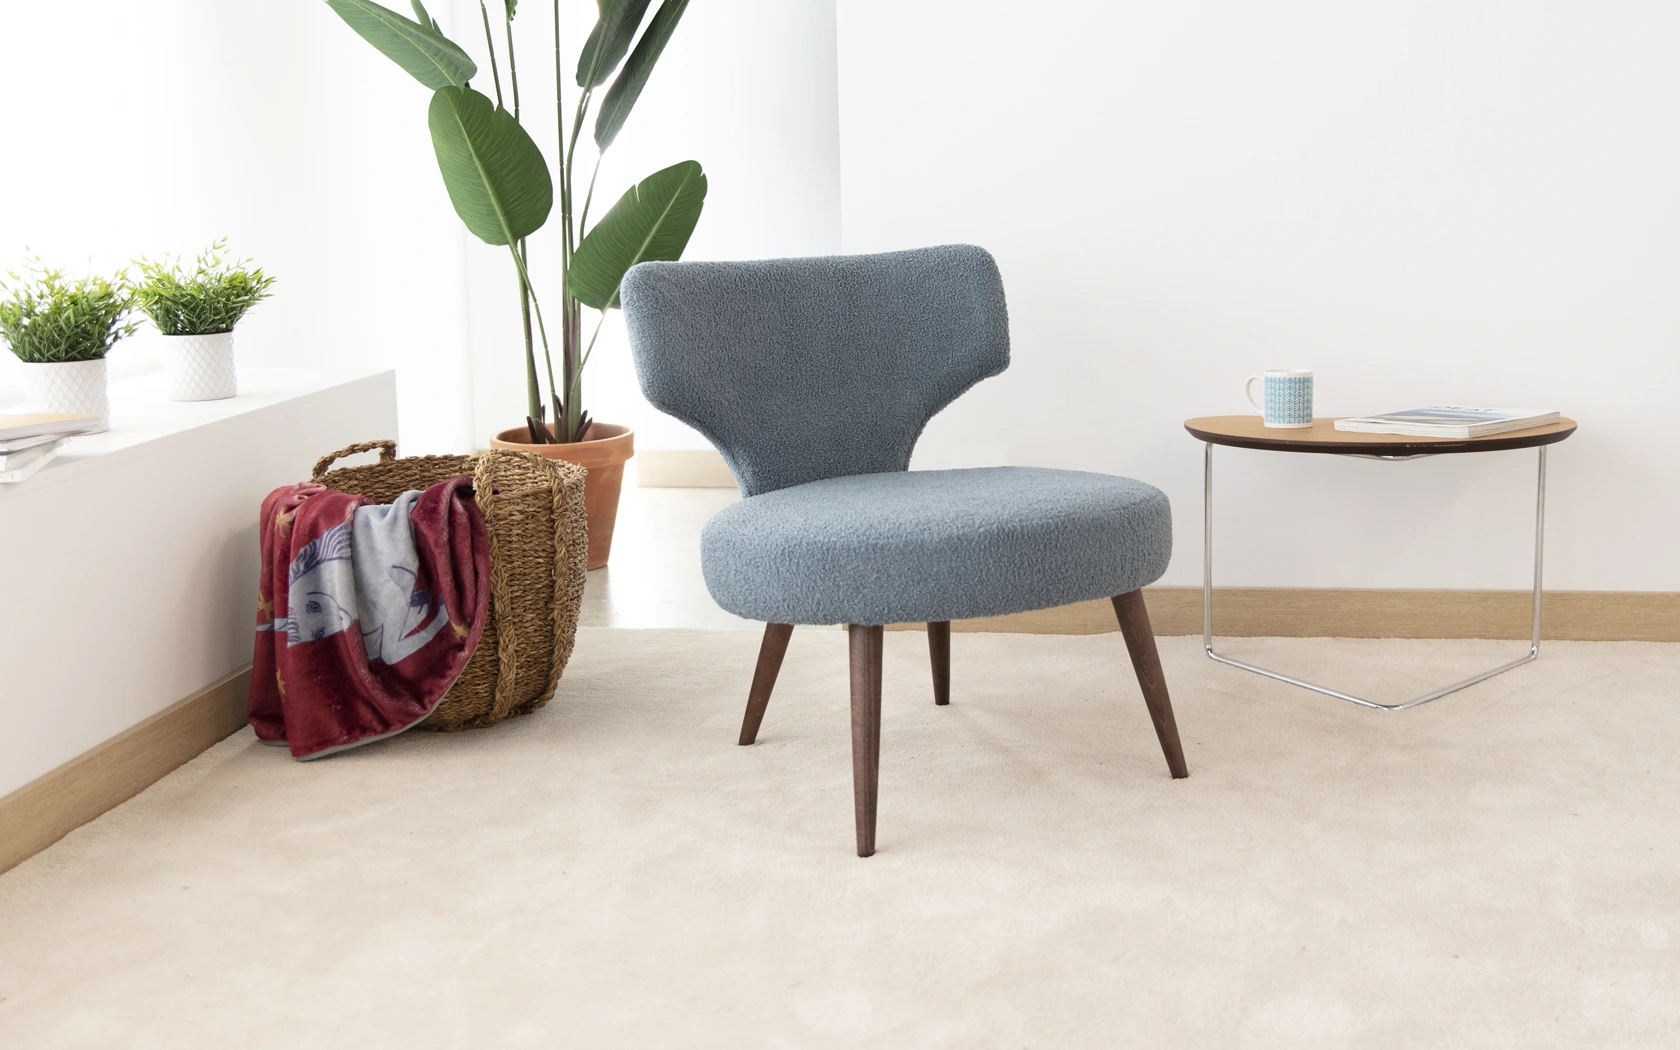 Zipo small complementary armchair